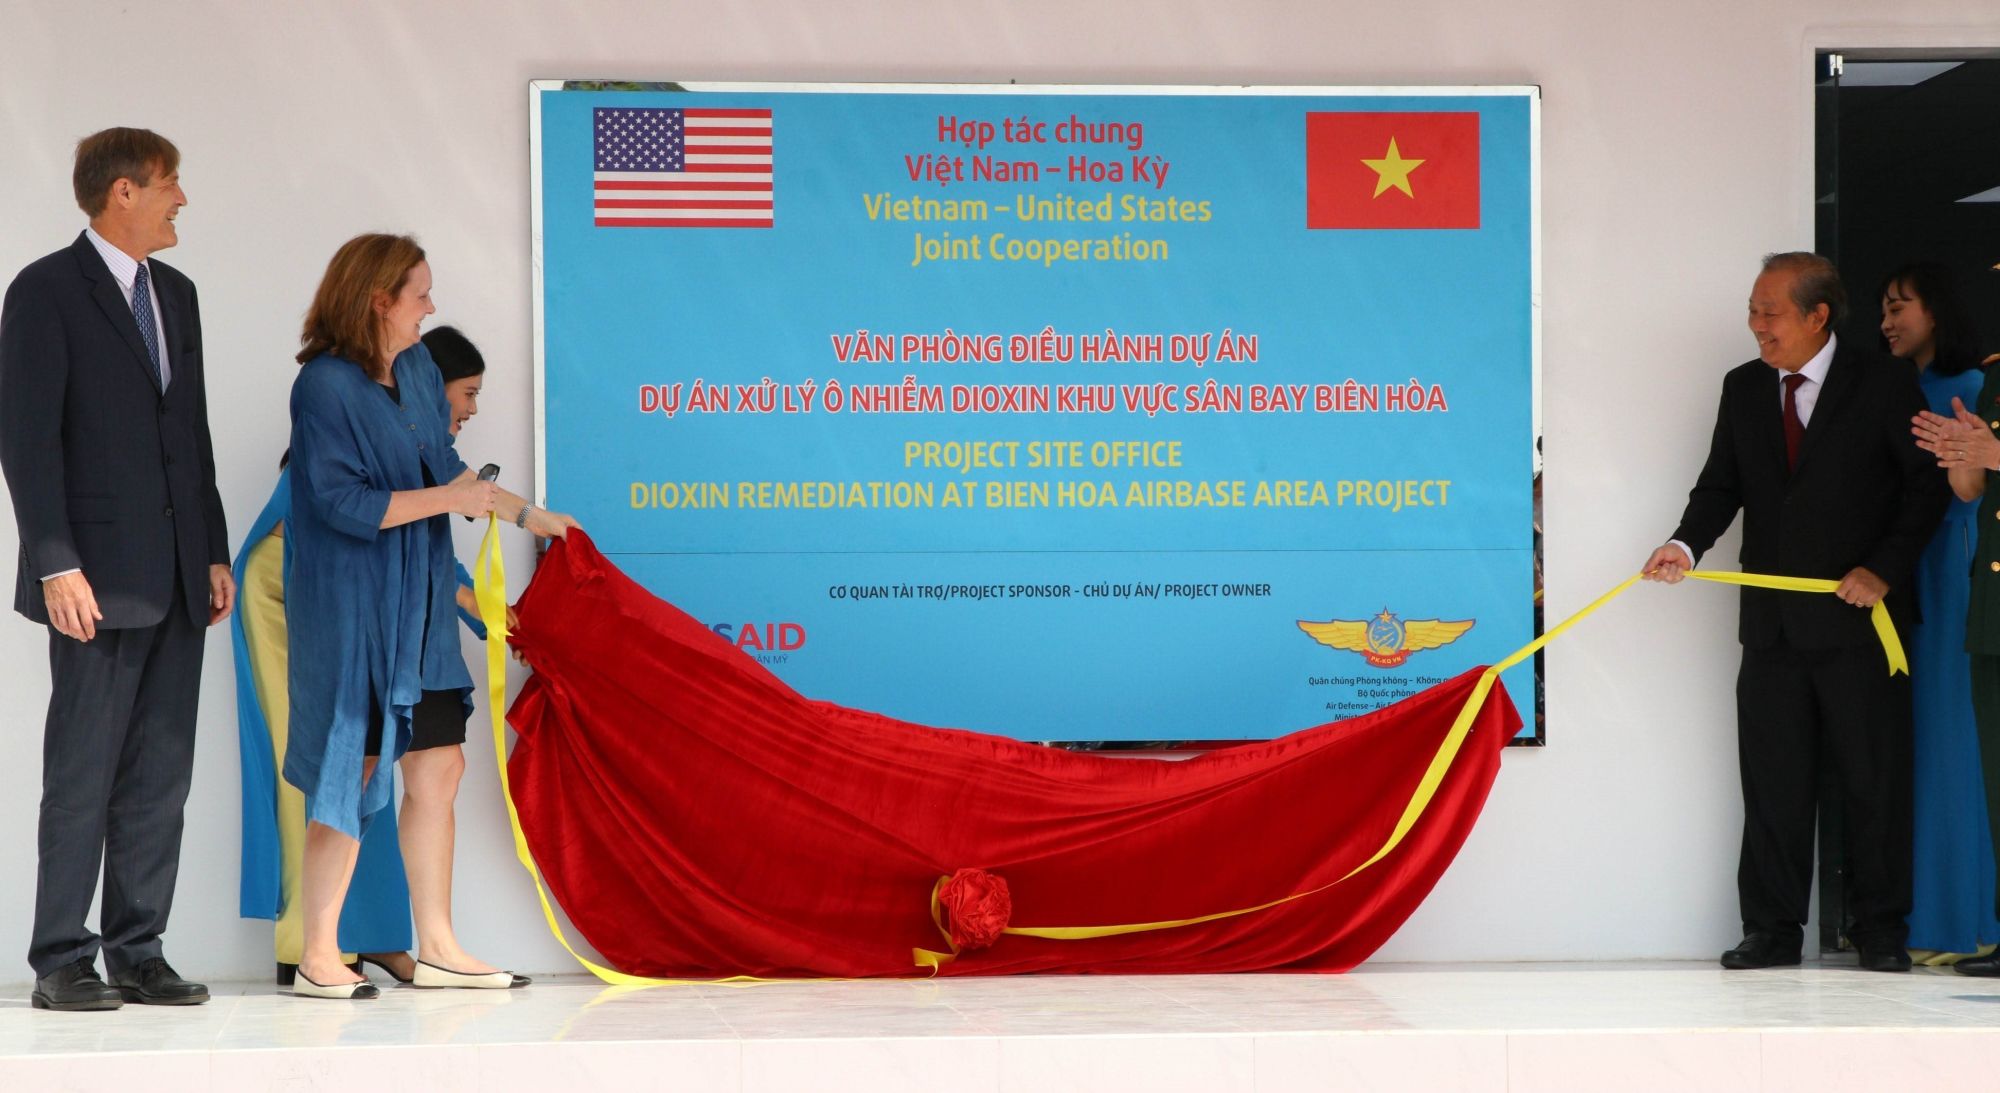 On December 5, 2019, USAID, the air defence - air force service of the Vietnamese Defence Ministry and the National Action Centre for Toxic Chemicals and Environmental Treatment (NACCET) launch the dioxin cleanup project at Bien Hoa Airbase and sign an agreement on implementing a 65-million-USD project supporting people with disabilities. (Photo: VNA)